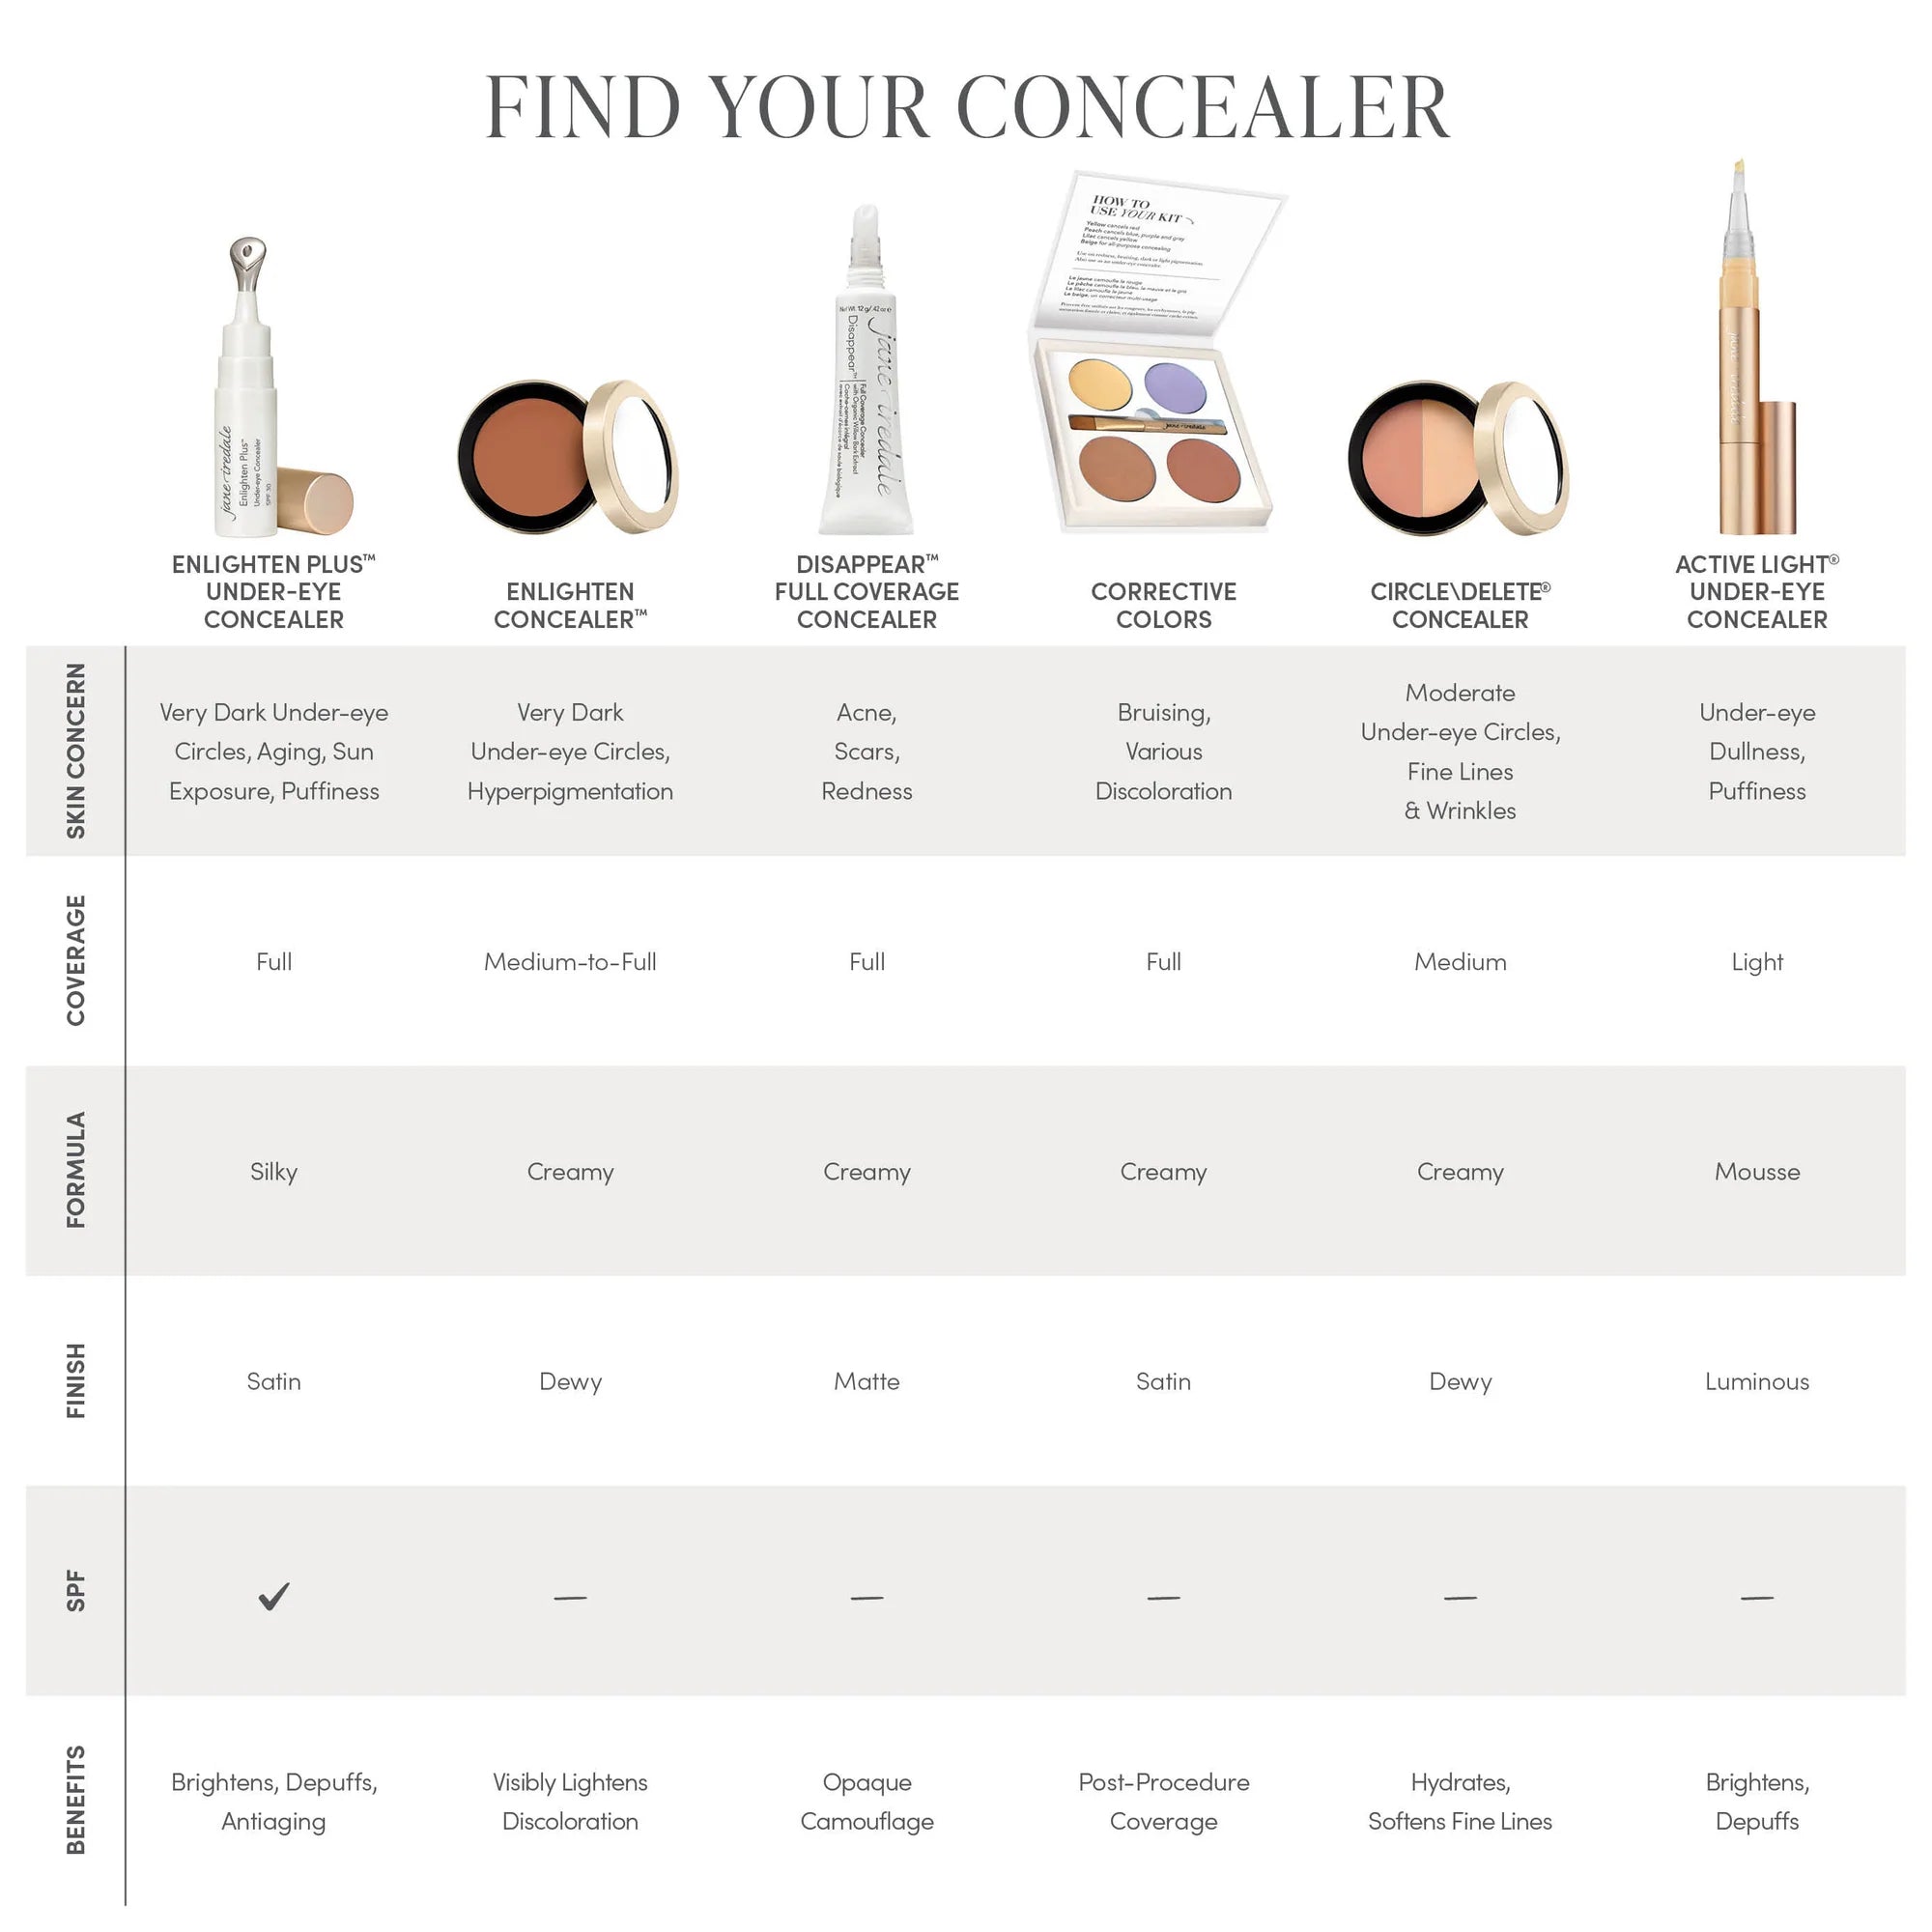 Jane Iredale's chart of finding your perfect concealer with Jane Iredale's concealer products